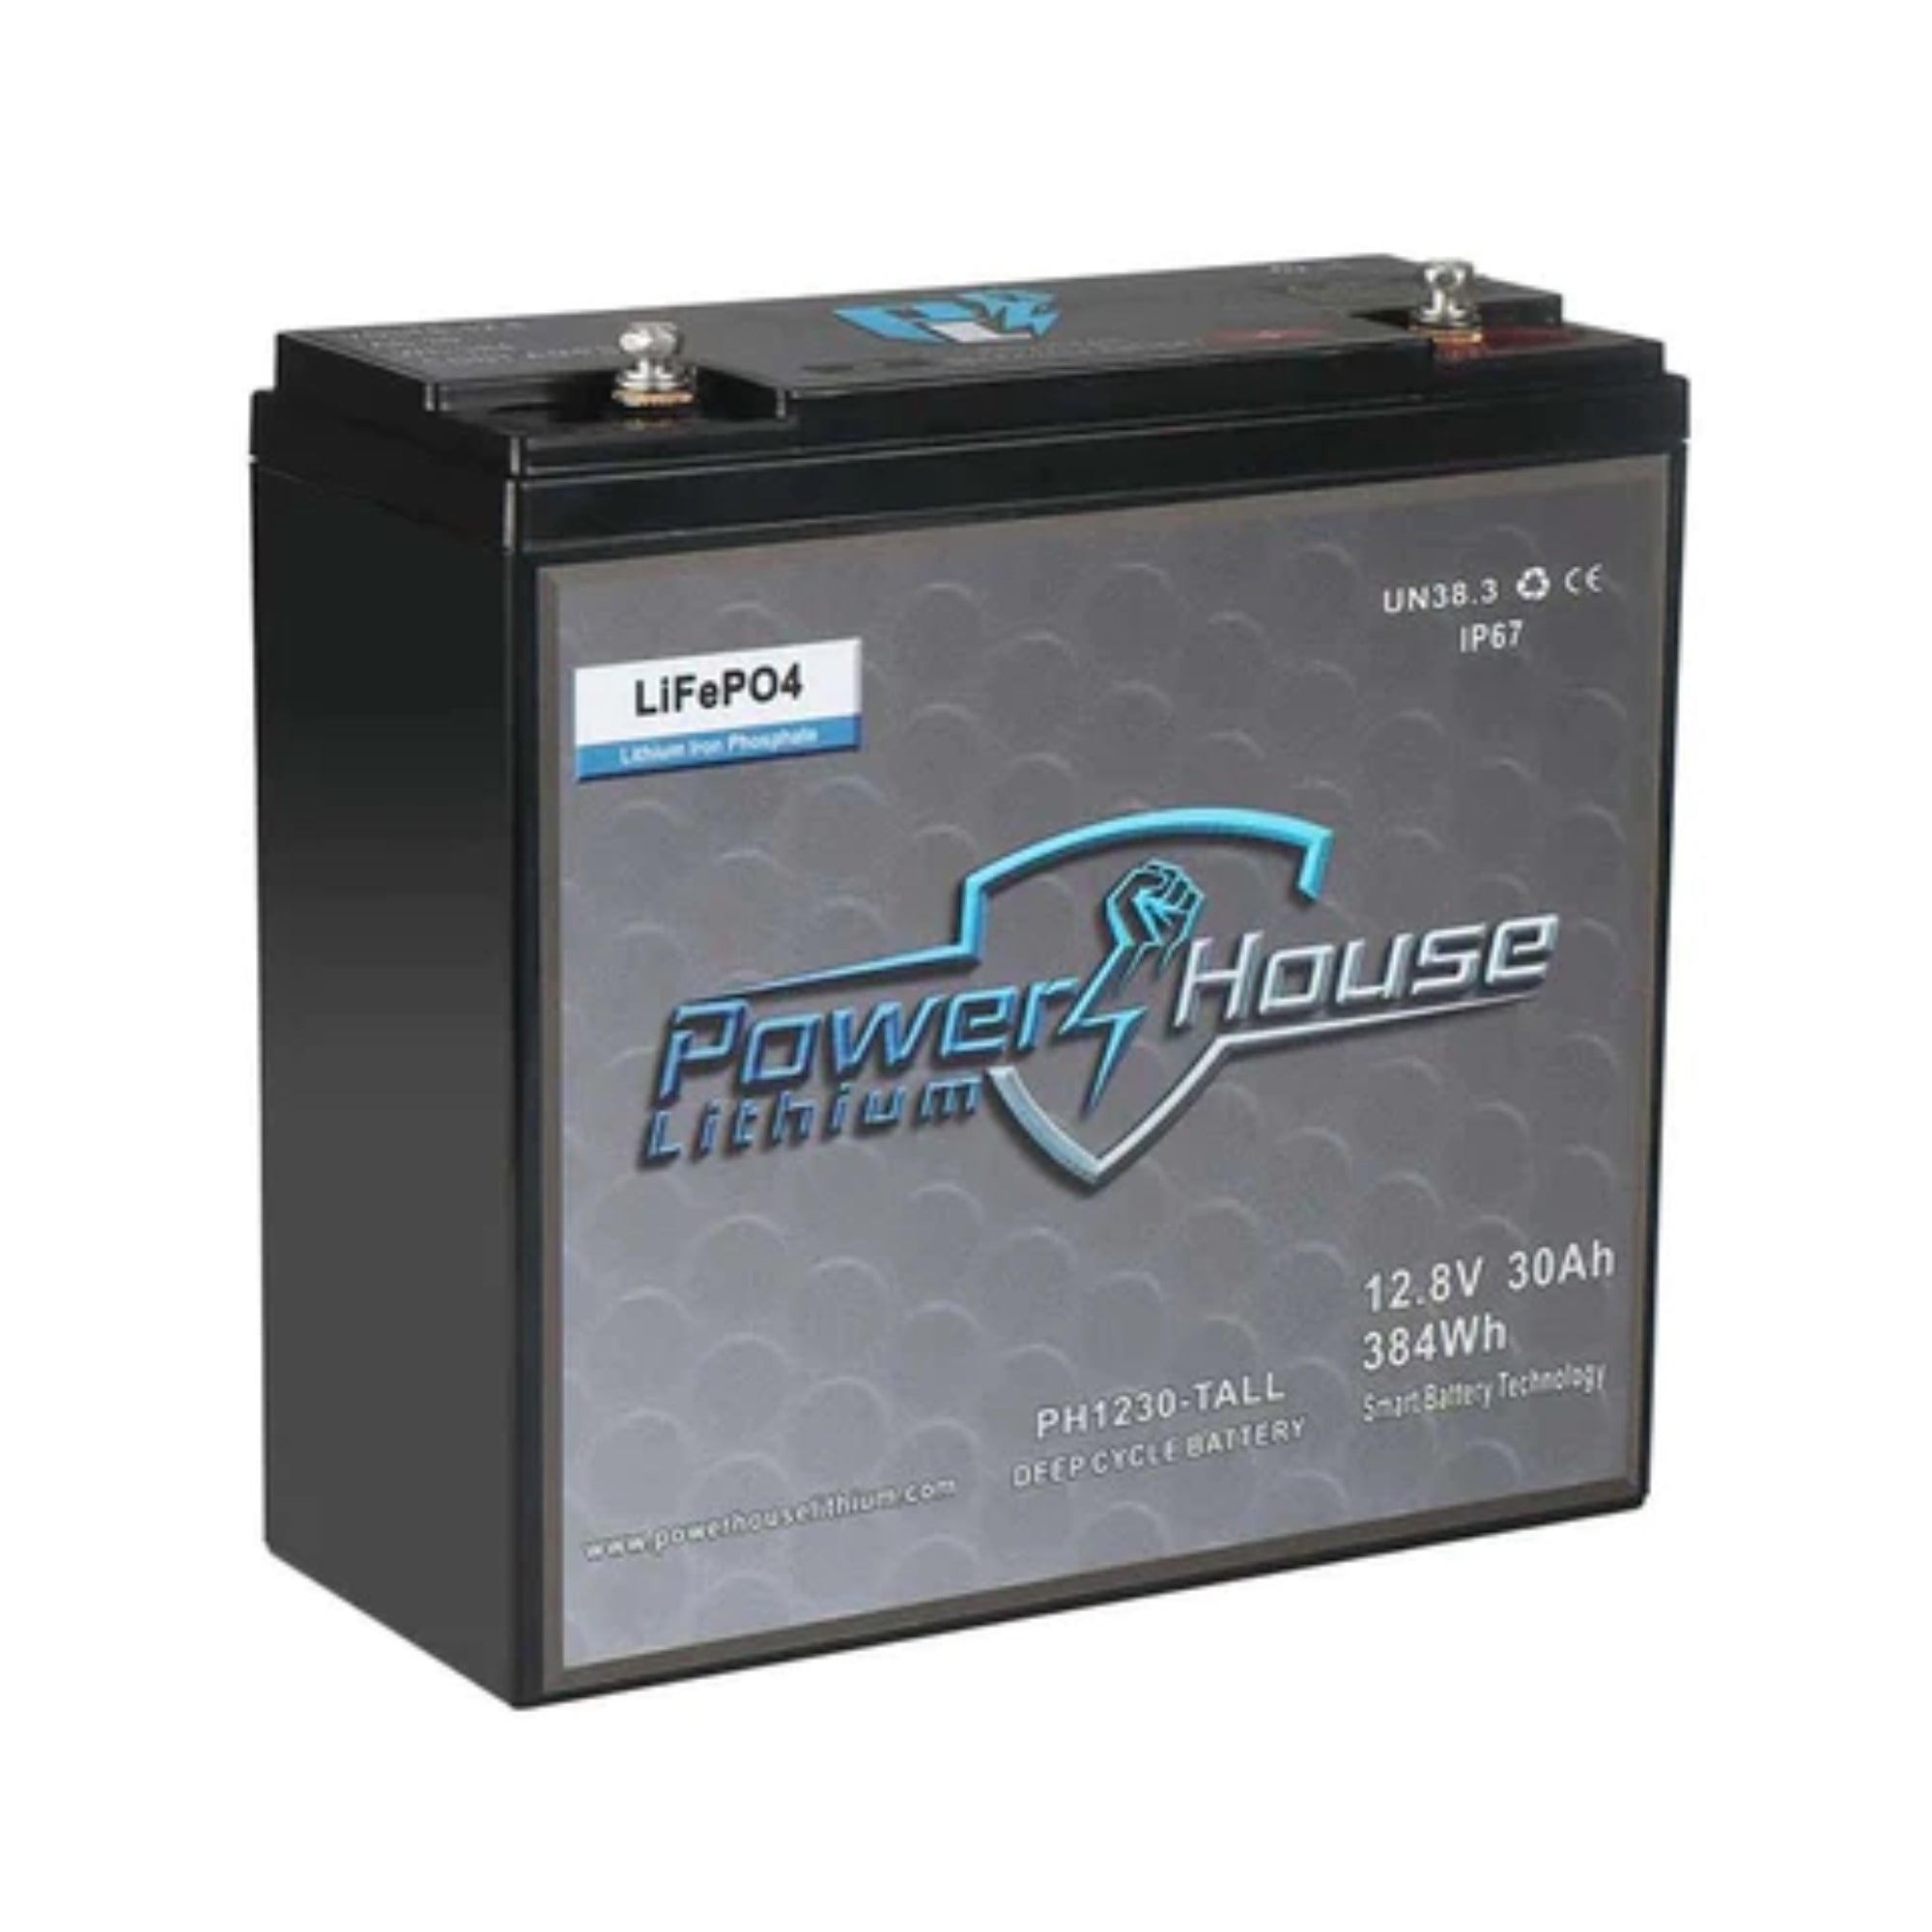 PowerHouse Lithium 12v 30Ah Deep Cycle Battery (Free Charger Included) (Tall)